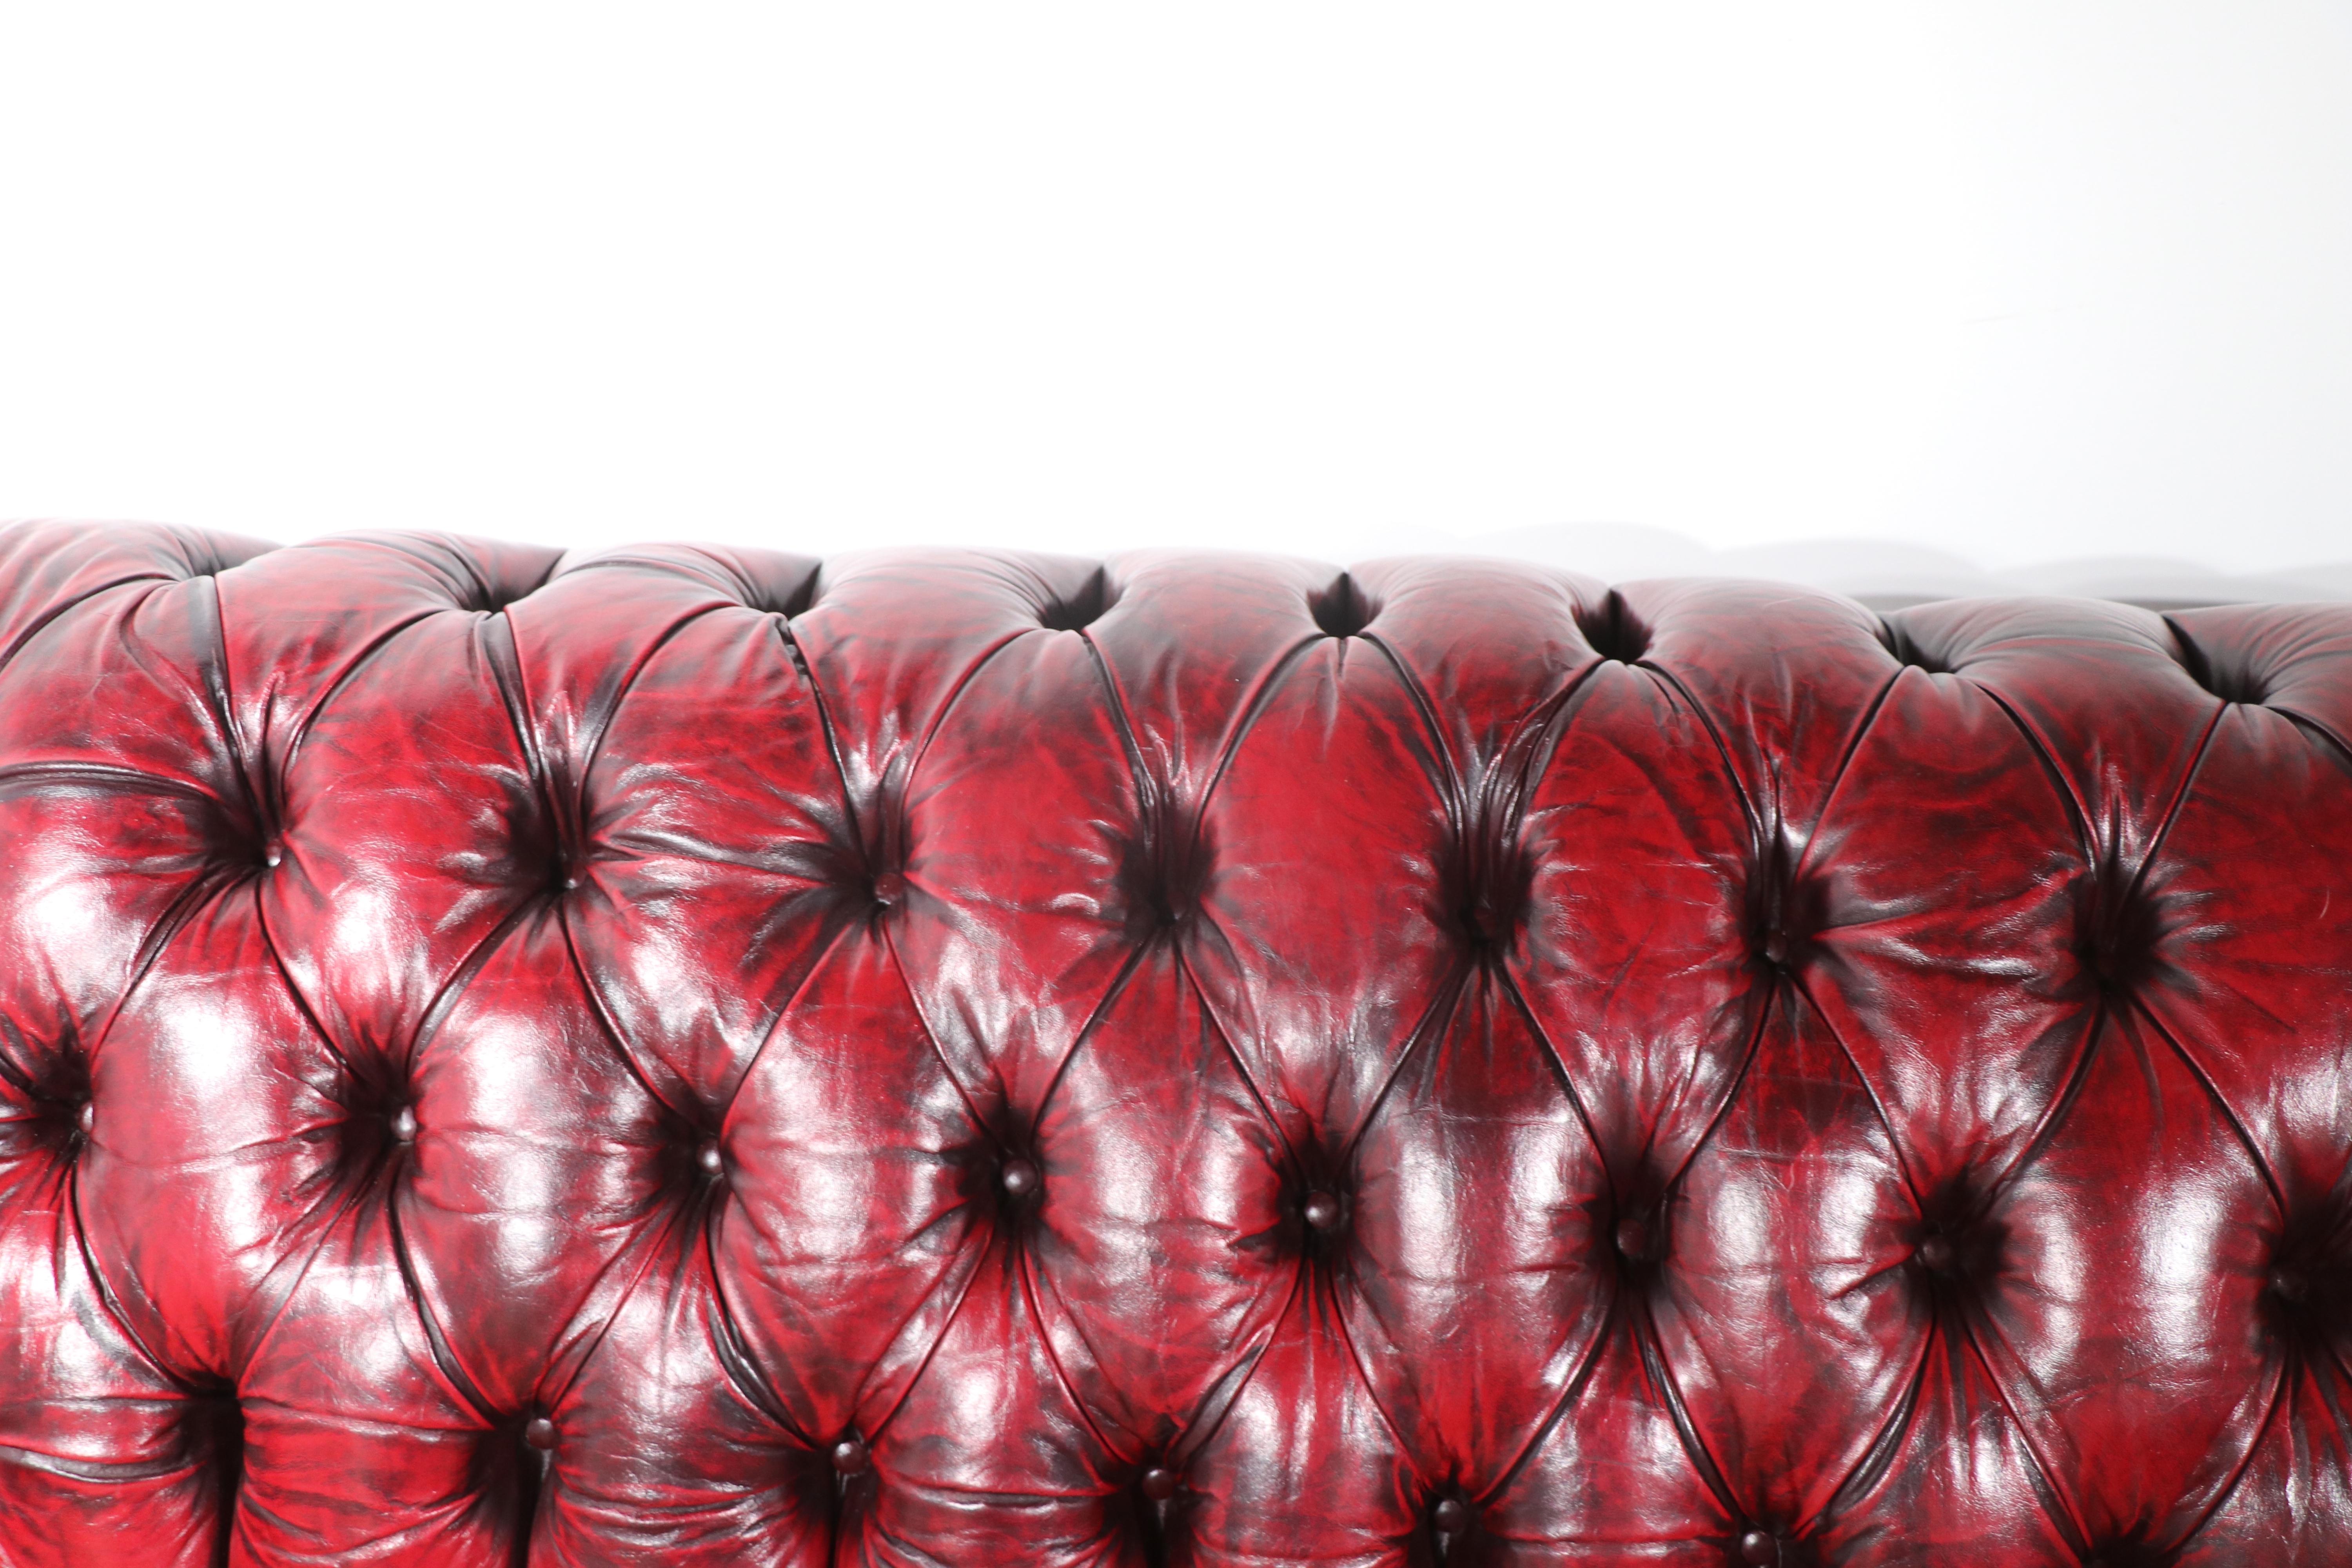 American Pr. C Shape Tufted Leather Chesterfield Sofas